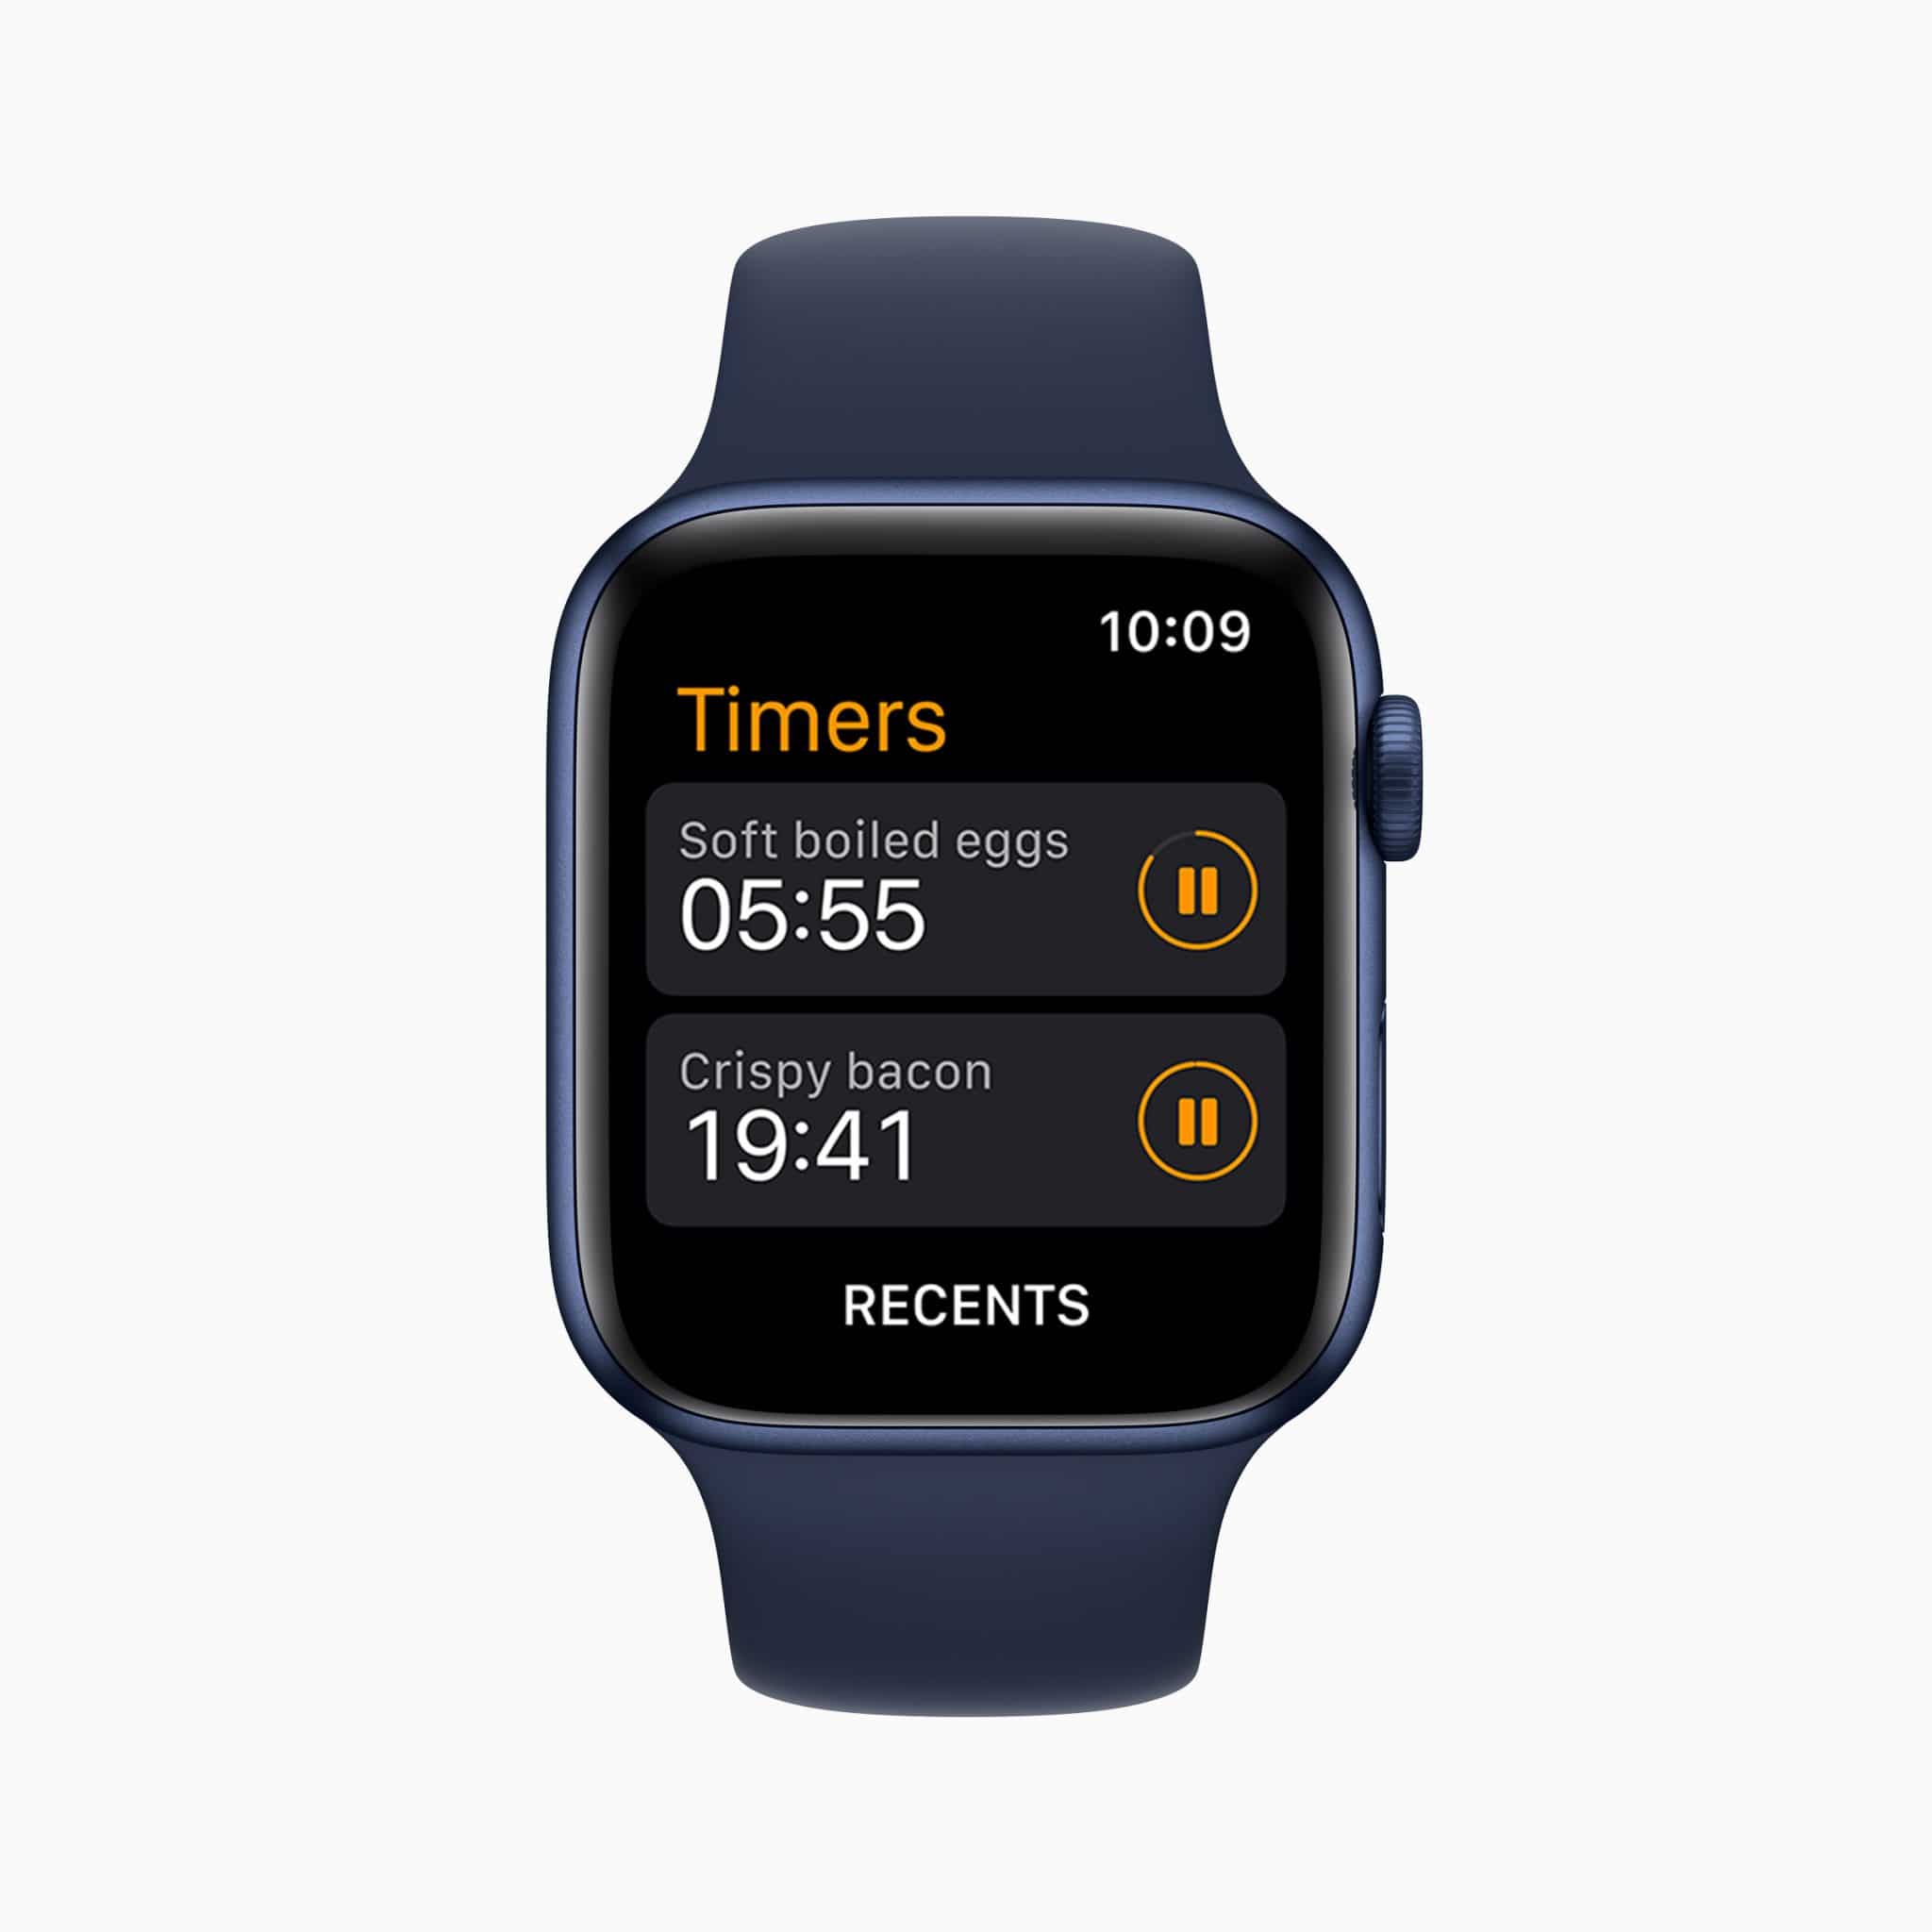 Apple Watch with Timer